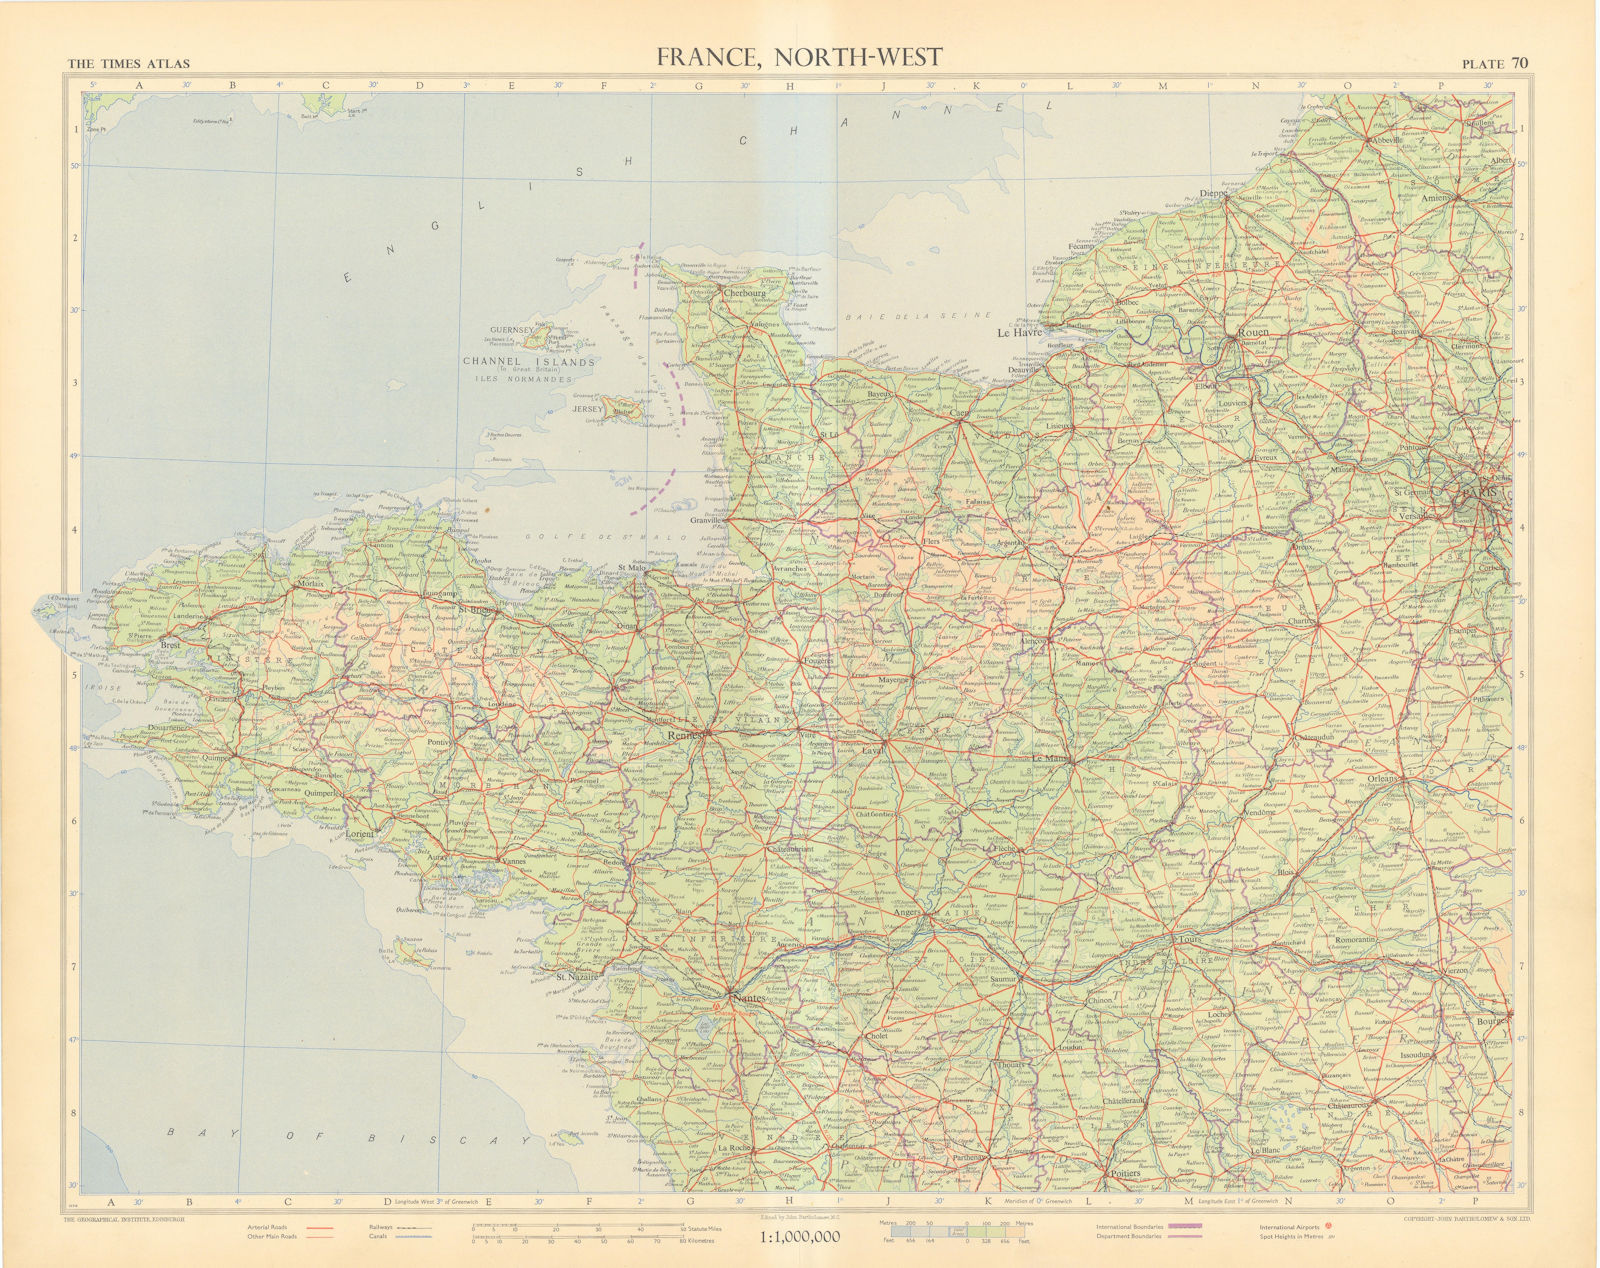 Associate Product France north-west. Normandy Brittany Pays de Loire. TIMES 1955 old vintage map